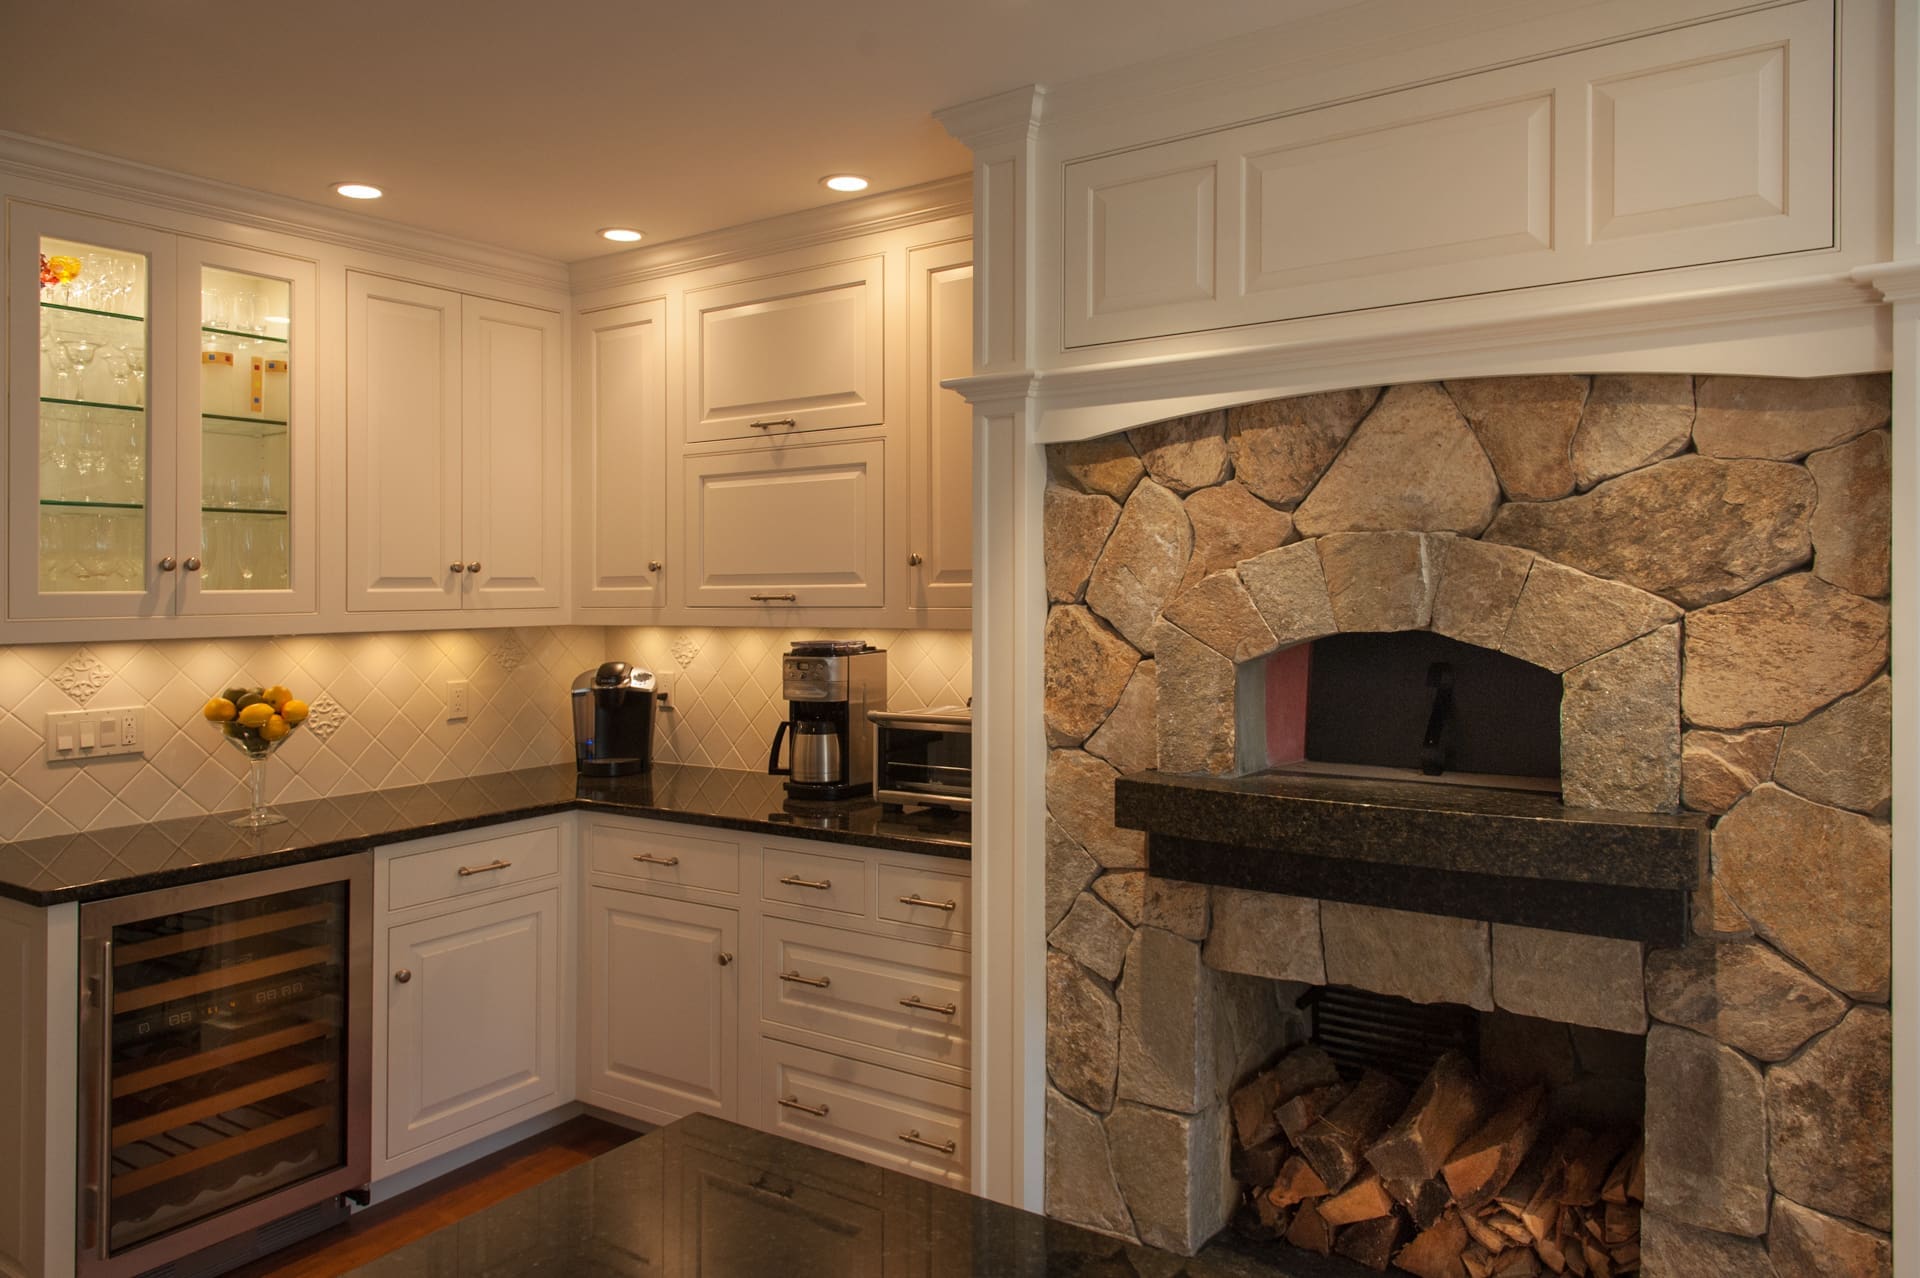 A photo of a kitchen with white raised panel cabinets, black marble countertops, and a built-in, stone wood-fired oven.